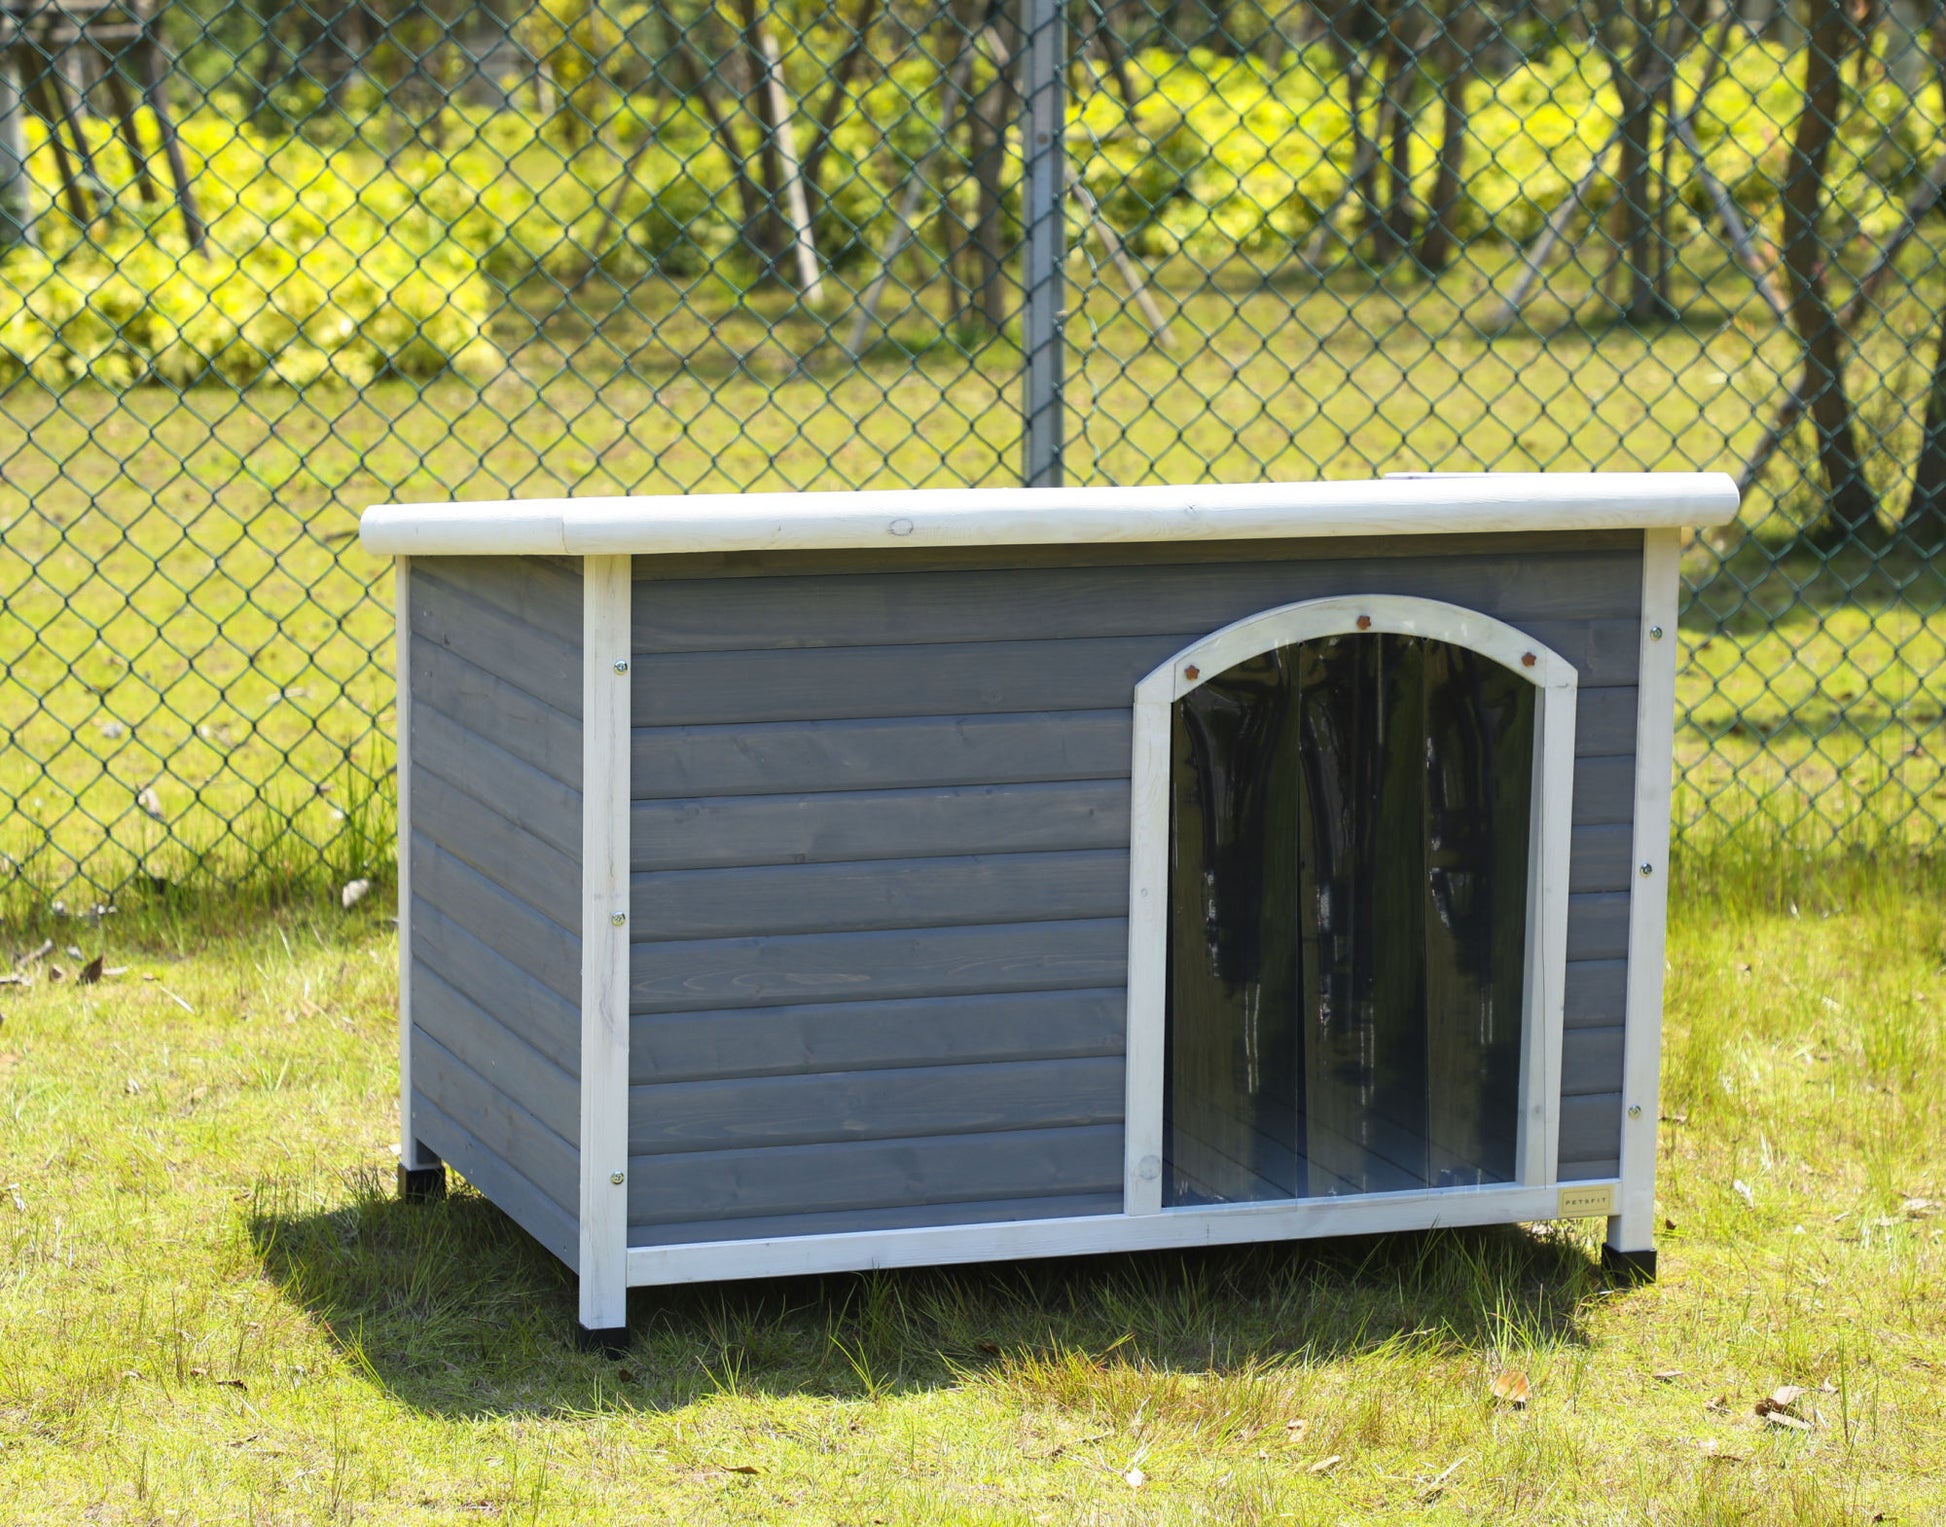 Wooden Dog Houses Weatherproof for Large Dog - Offbeat Abode and Unique Beats